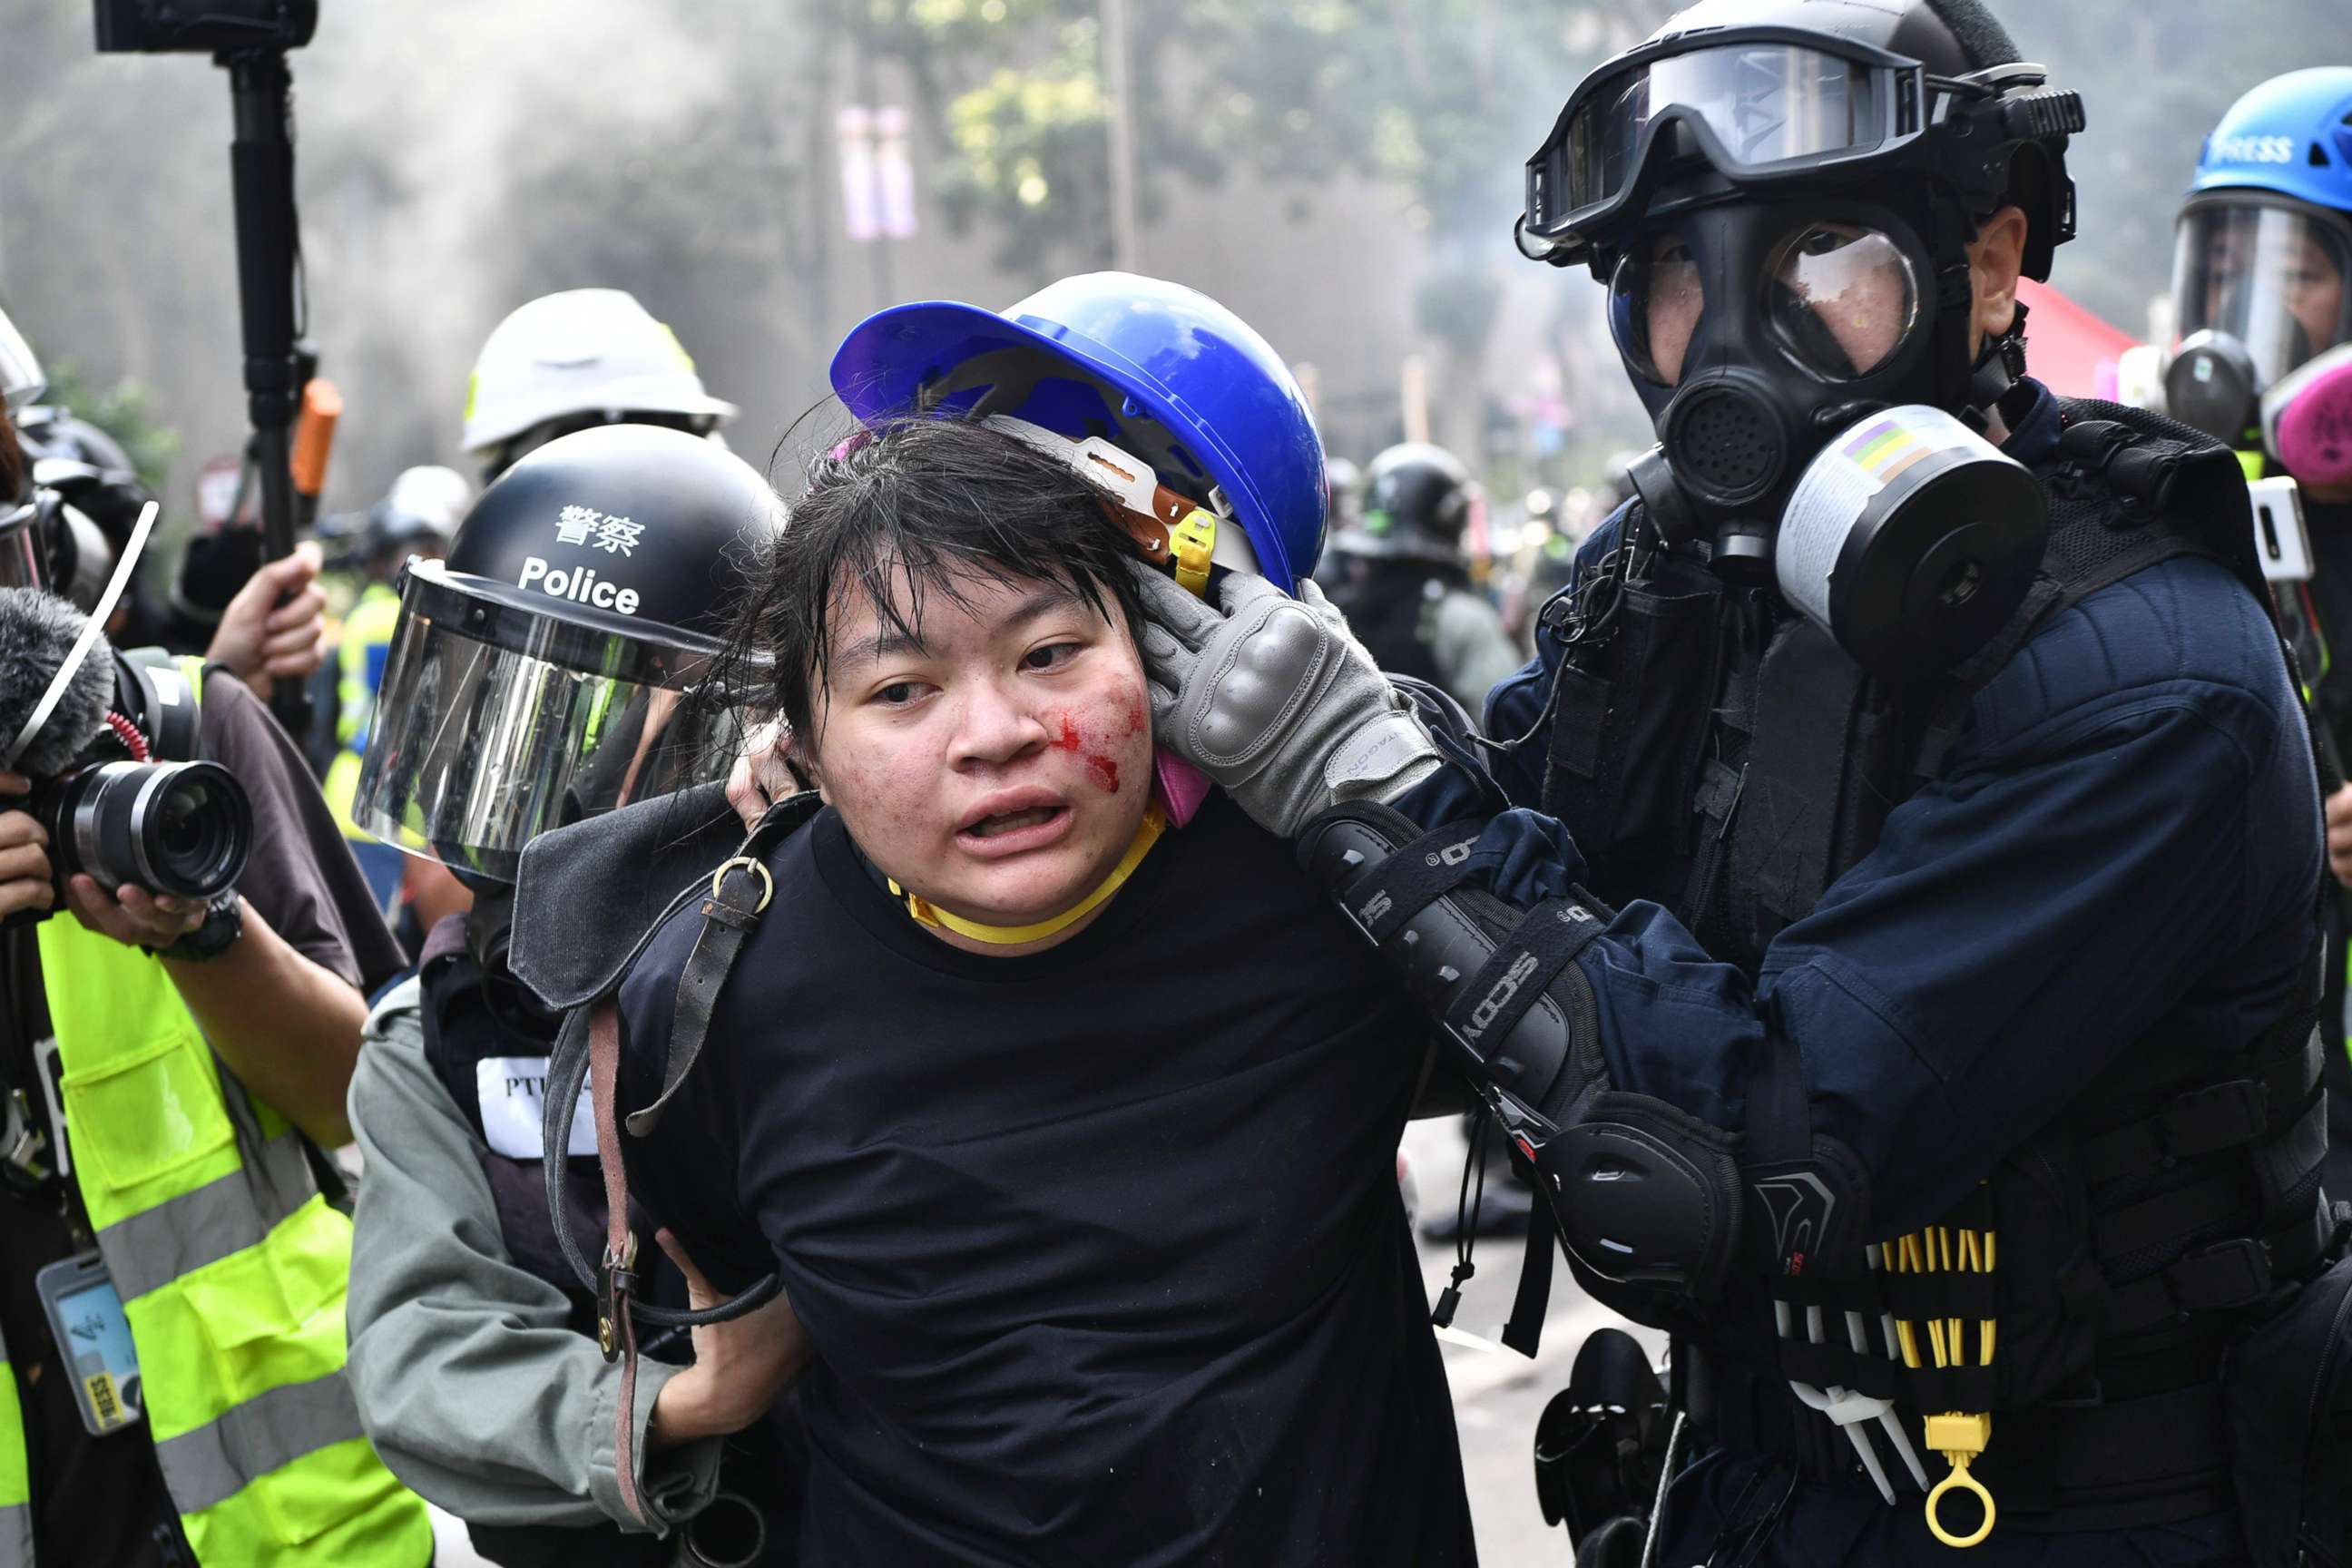 PHOTO: Protesters are detained by police near the Hong Kong Polytechnic University in Hung Hom district of Hong Kong on Nov. 18, 2019.